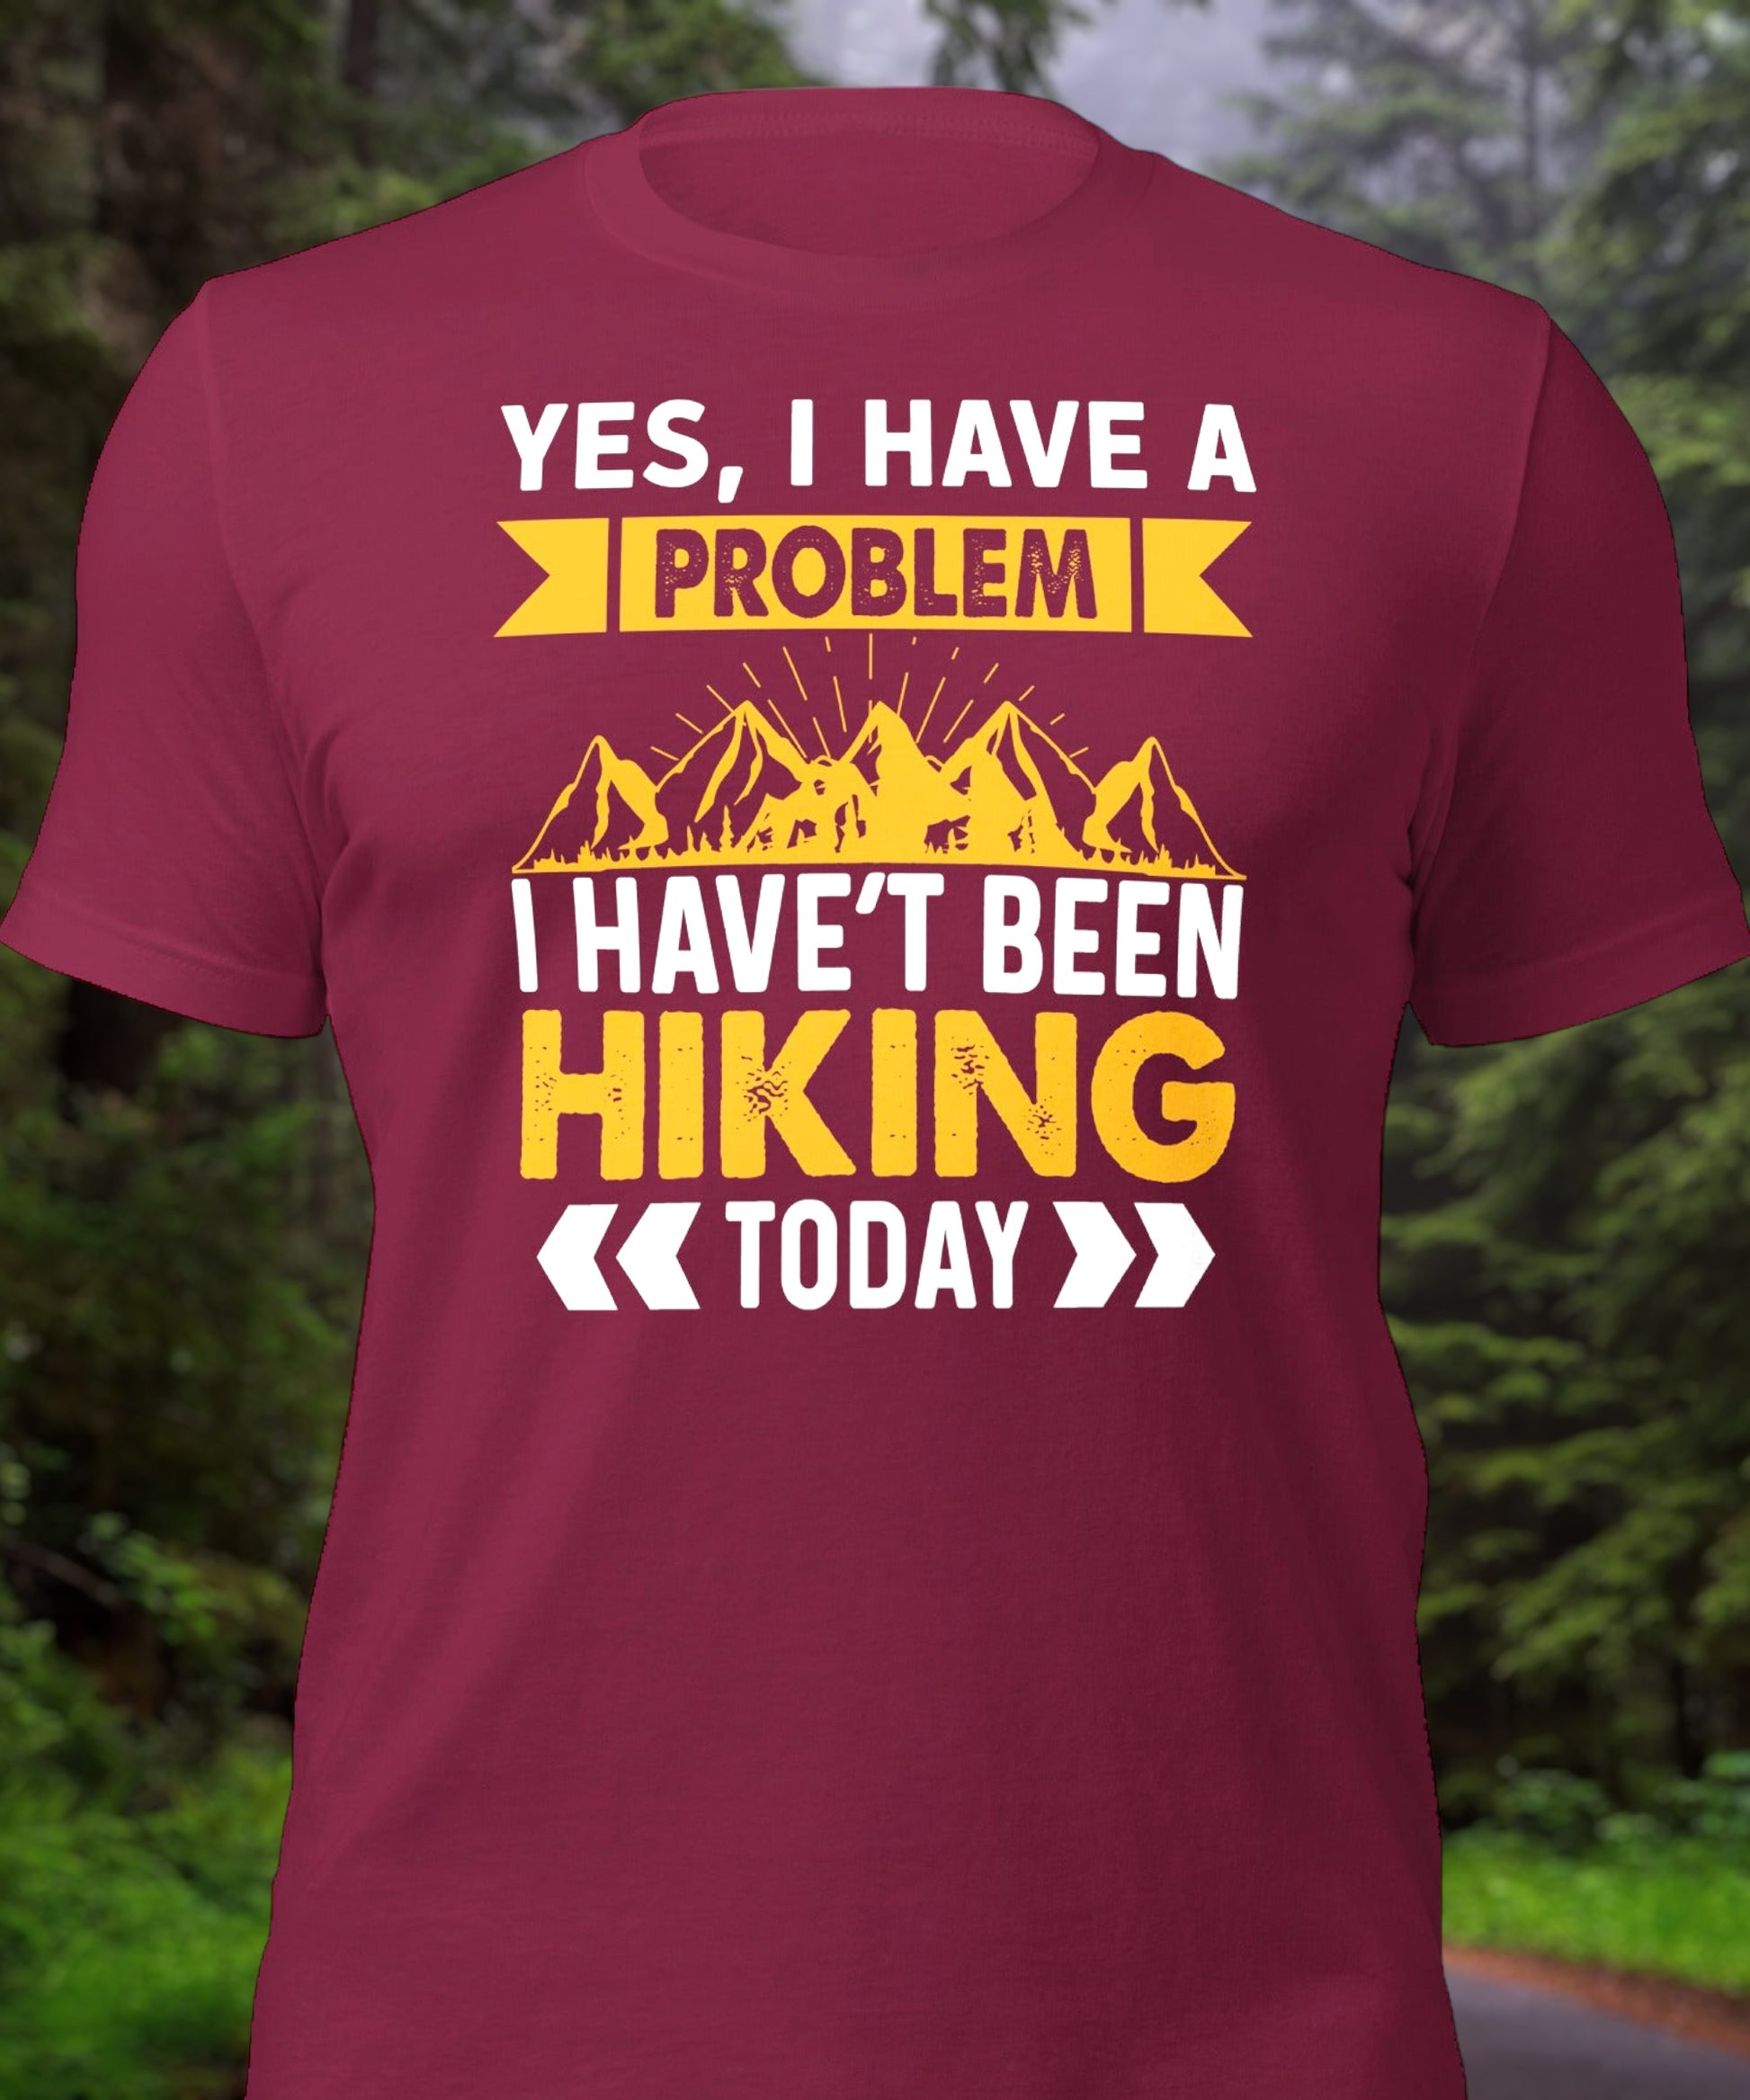 "I Haven't Been Hiking Today" T-Shirt - Weave Got Gifts - Unique Gifts You Won’t Find Anywhere Else!